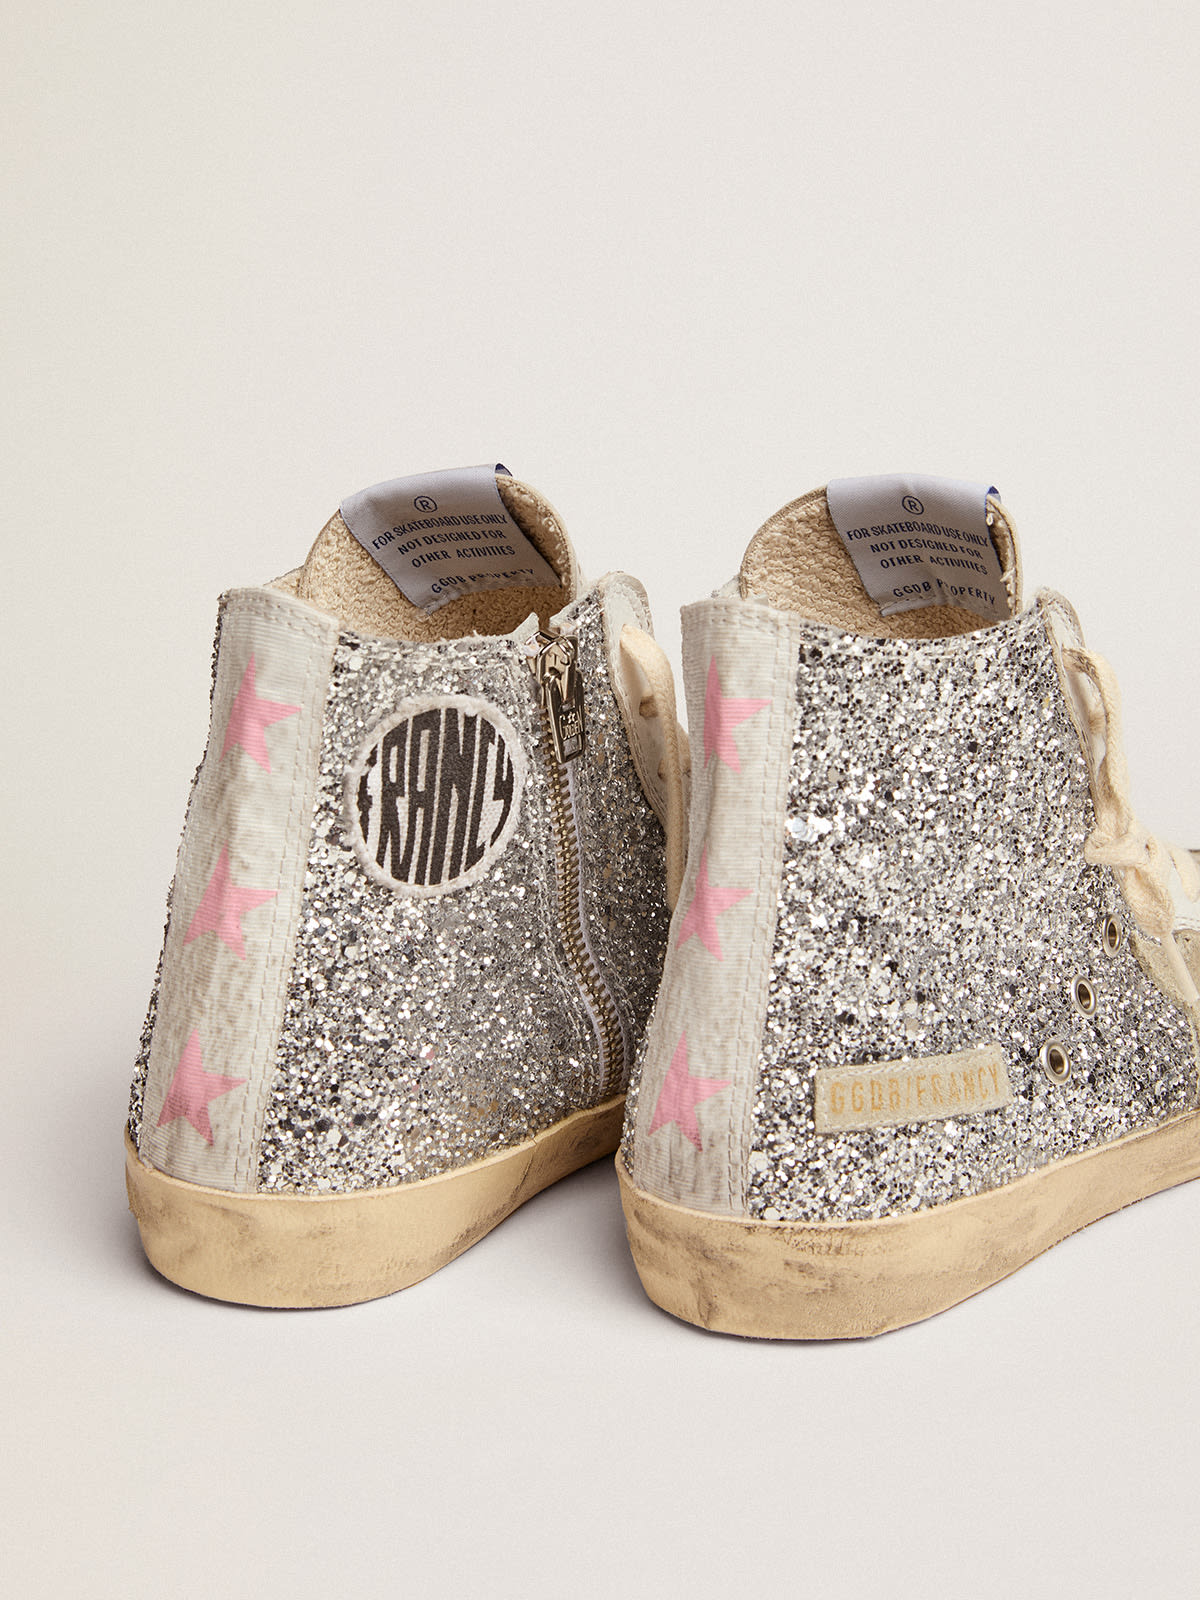 Super-Star in silver glitter with ice-gray suede star